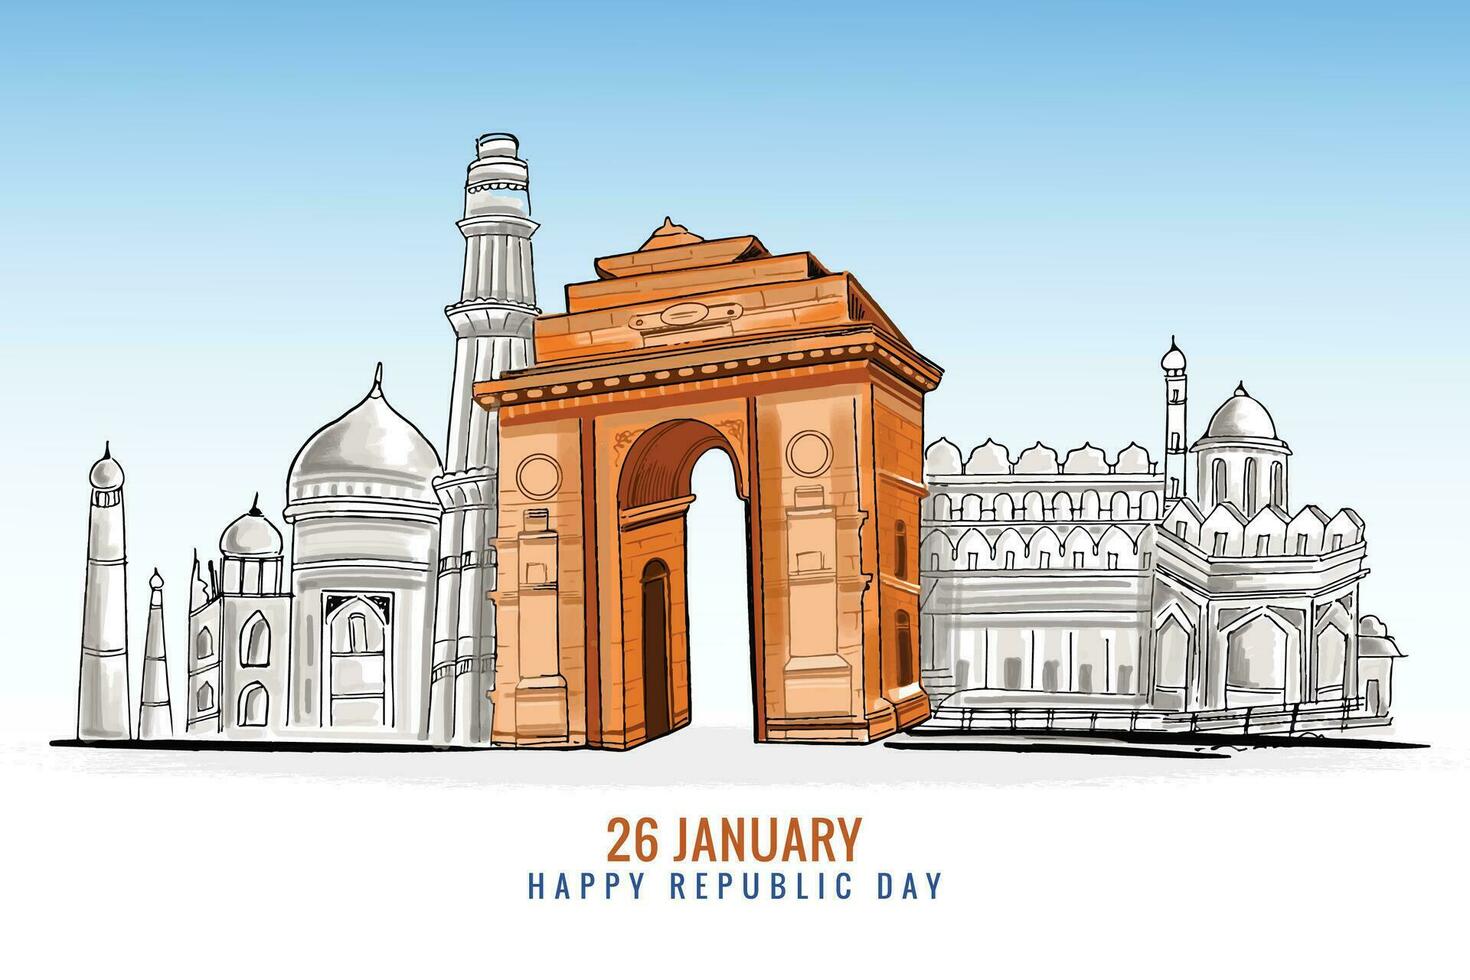 Happy republic day 26 January indian monuments for india background vector